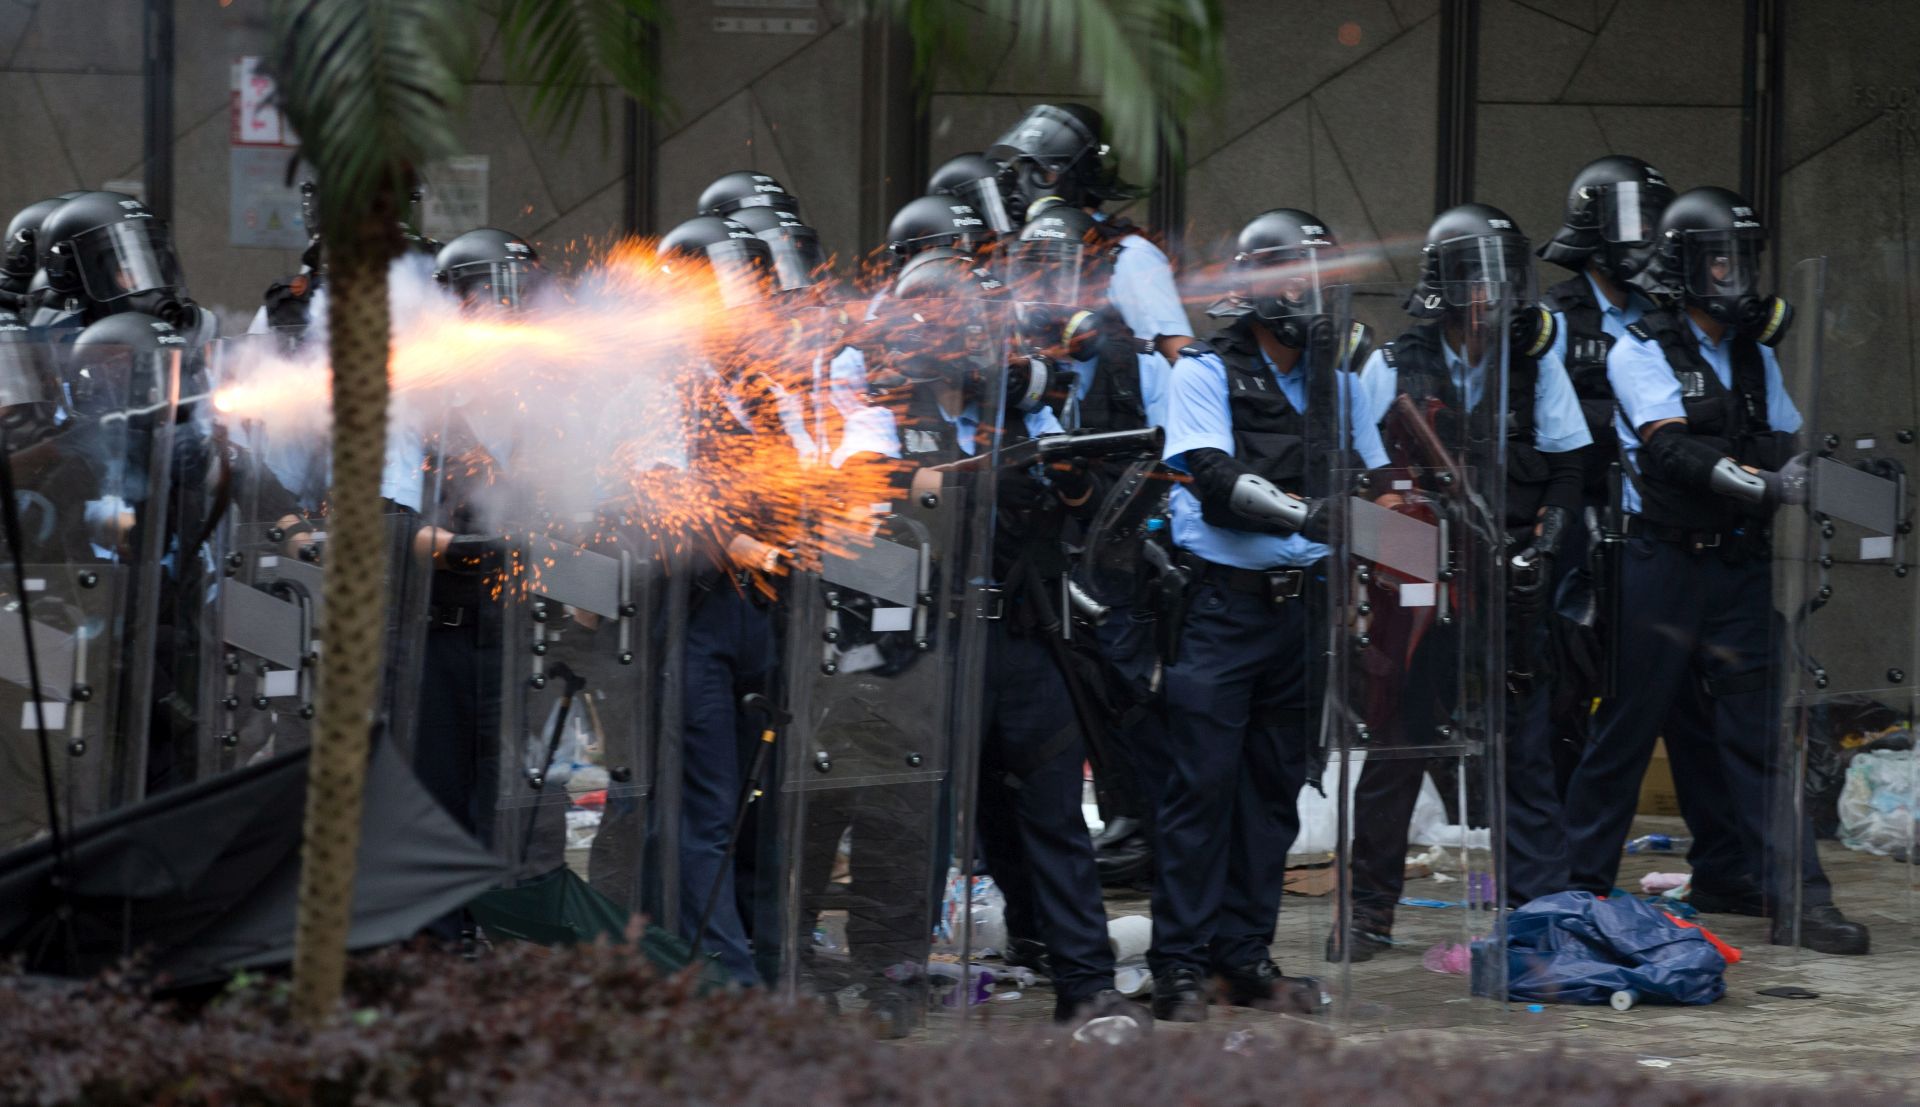 epa07643089 Police shot tear gas at protesters during a rally against an extradition bill outside the Legislative Council in Hong Kong, China, 12 June 2019. The bill has faced immense opposition from pan-democrats, the business sector, and the international community, would allow the transfer of fugitives to jurisdictions which Hong Kong does not have a treaty with, including mainland China. Critics of the bill have expressed concern over unfair trials and a lack of human rights protection in mainland China.  EPA/JEROME FAVRE